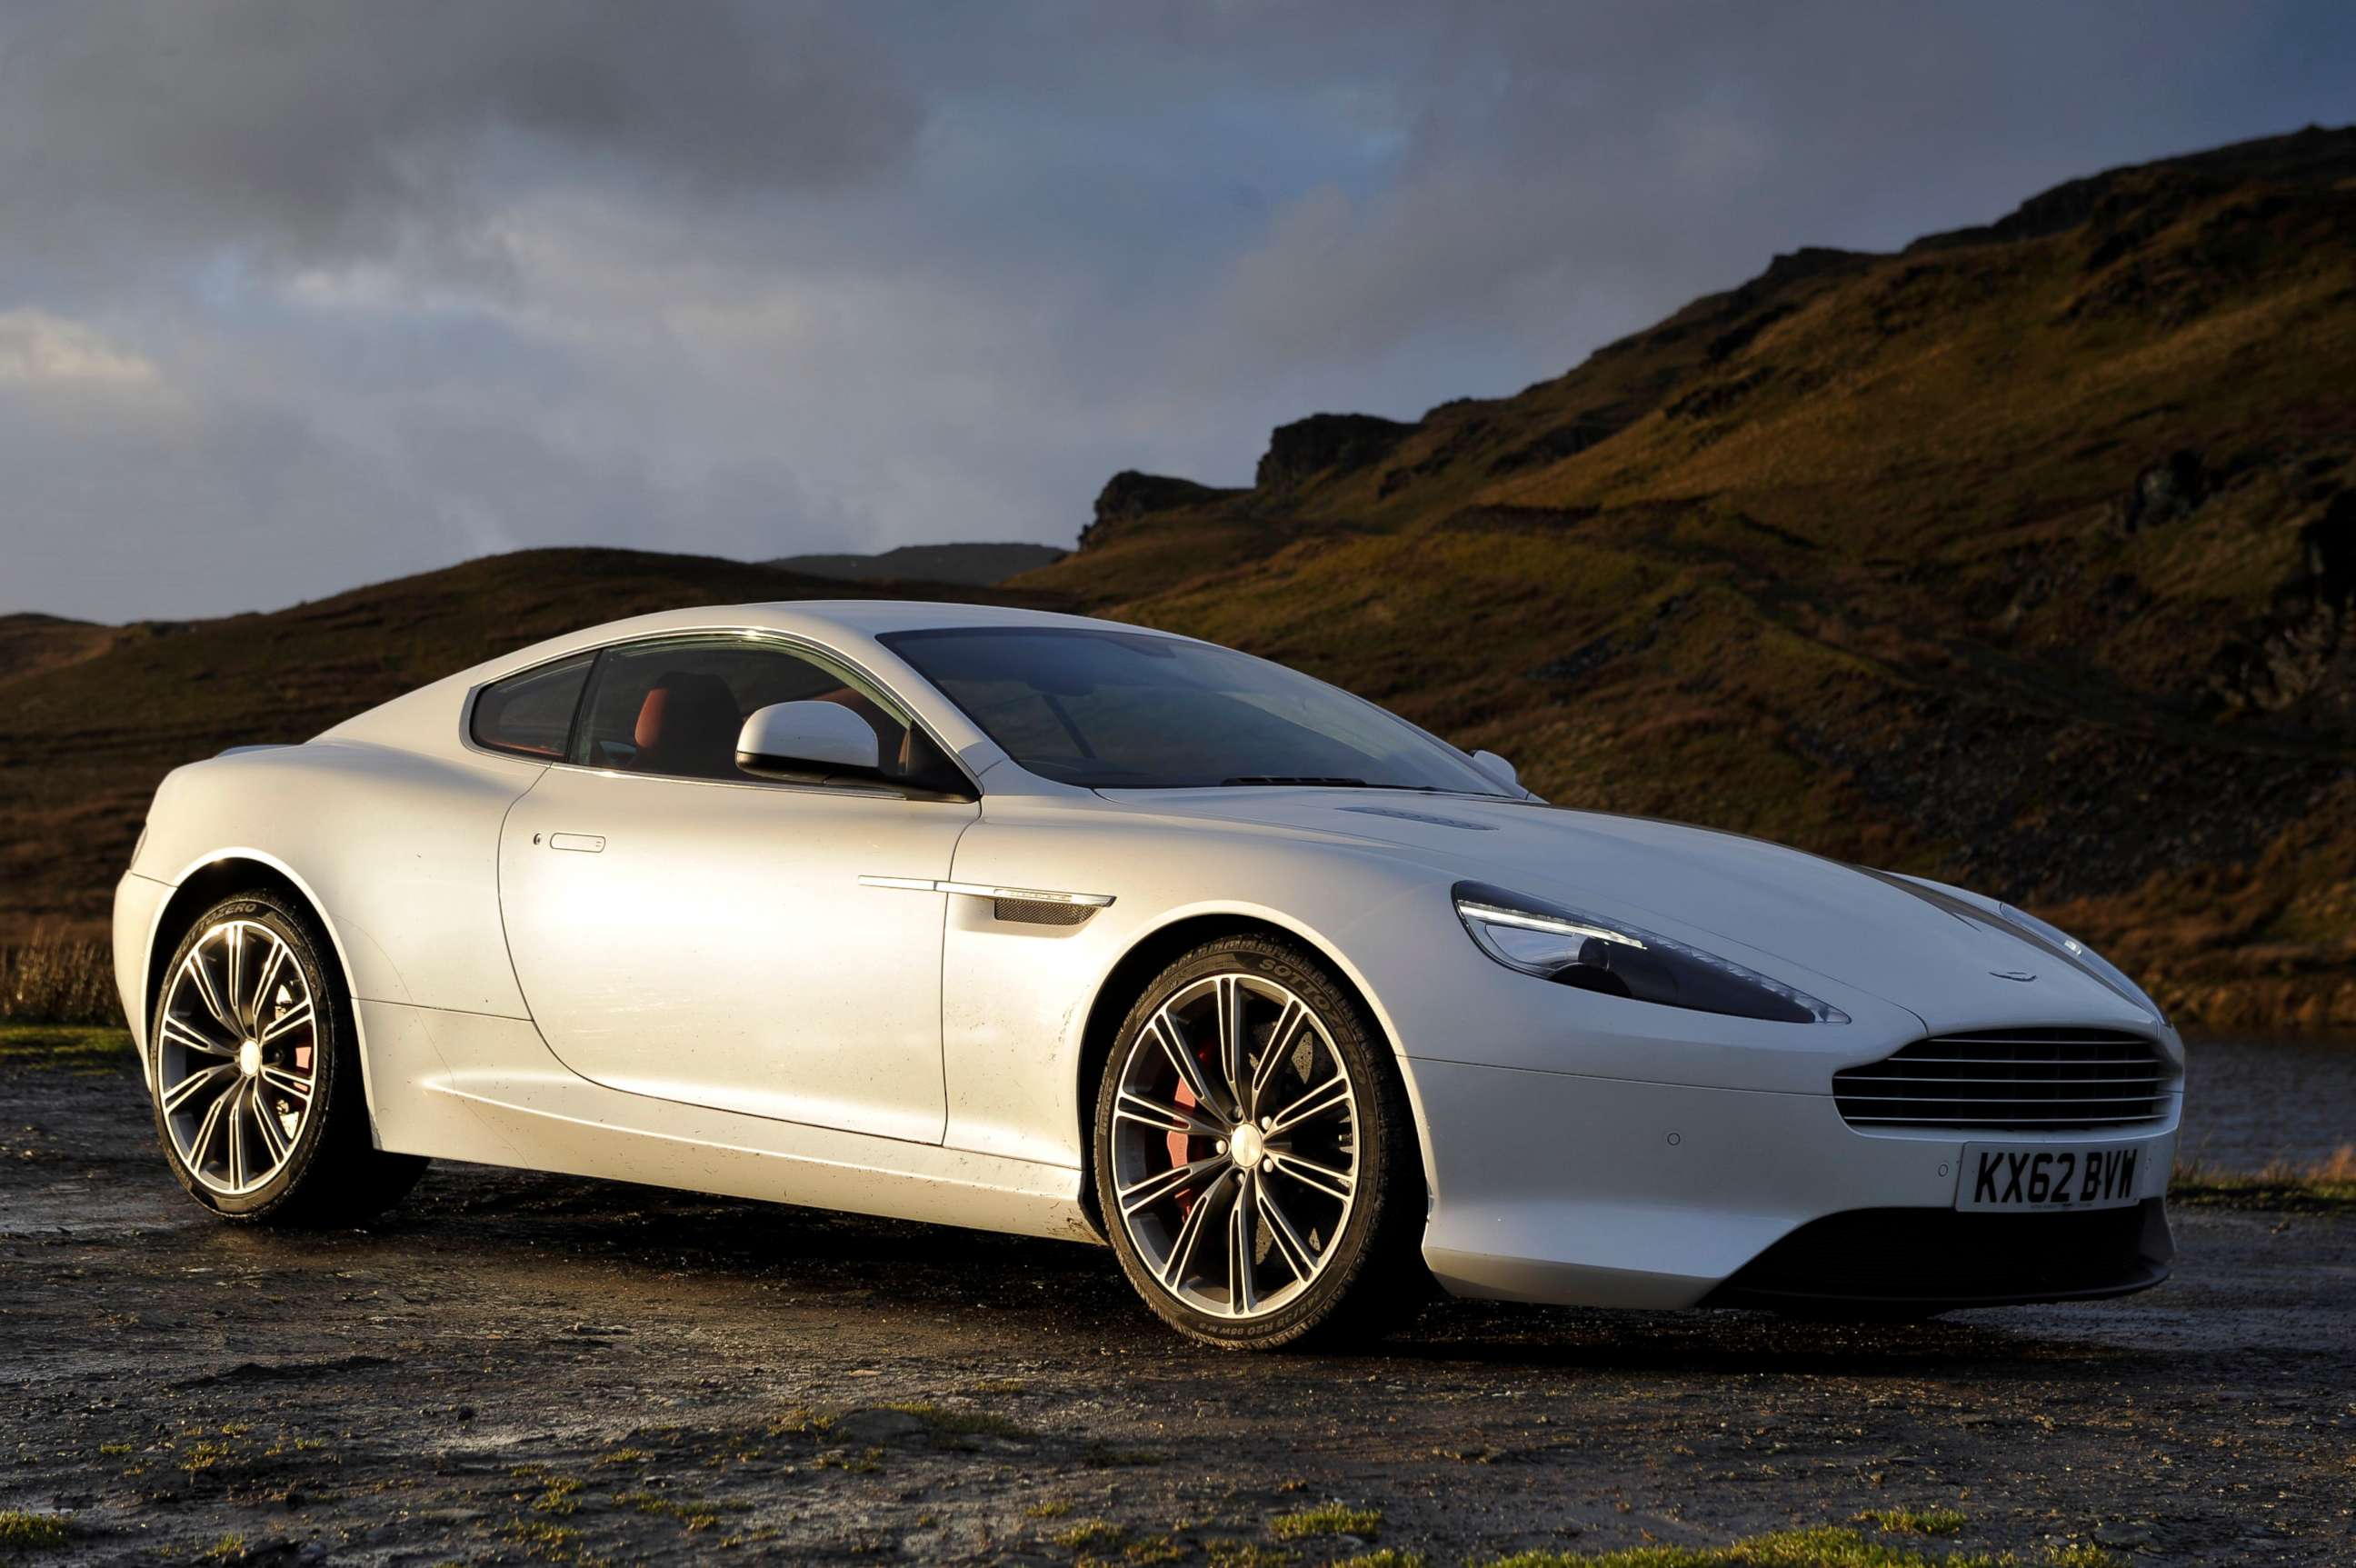 PHOTO: An Aston Martin DB9 sports car is pictured in the United Kingdom on Feb. 14, 2013.